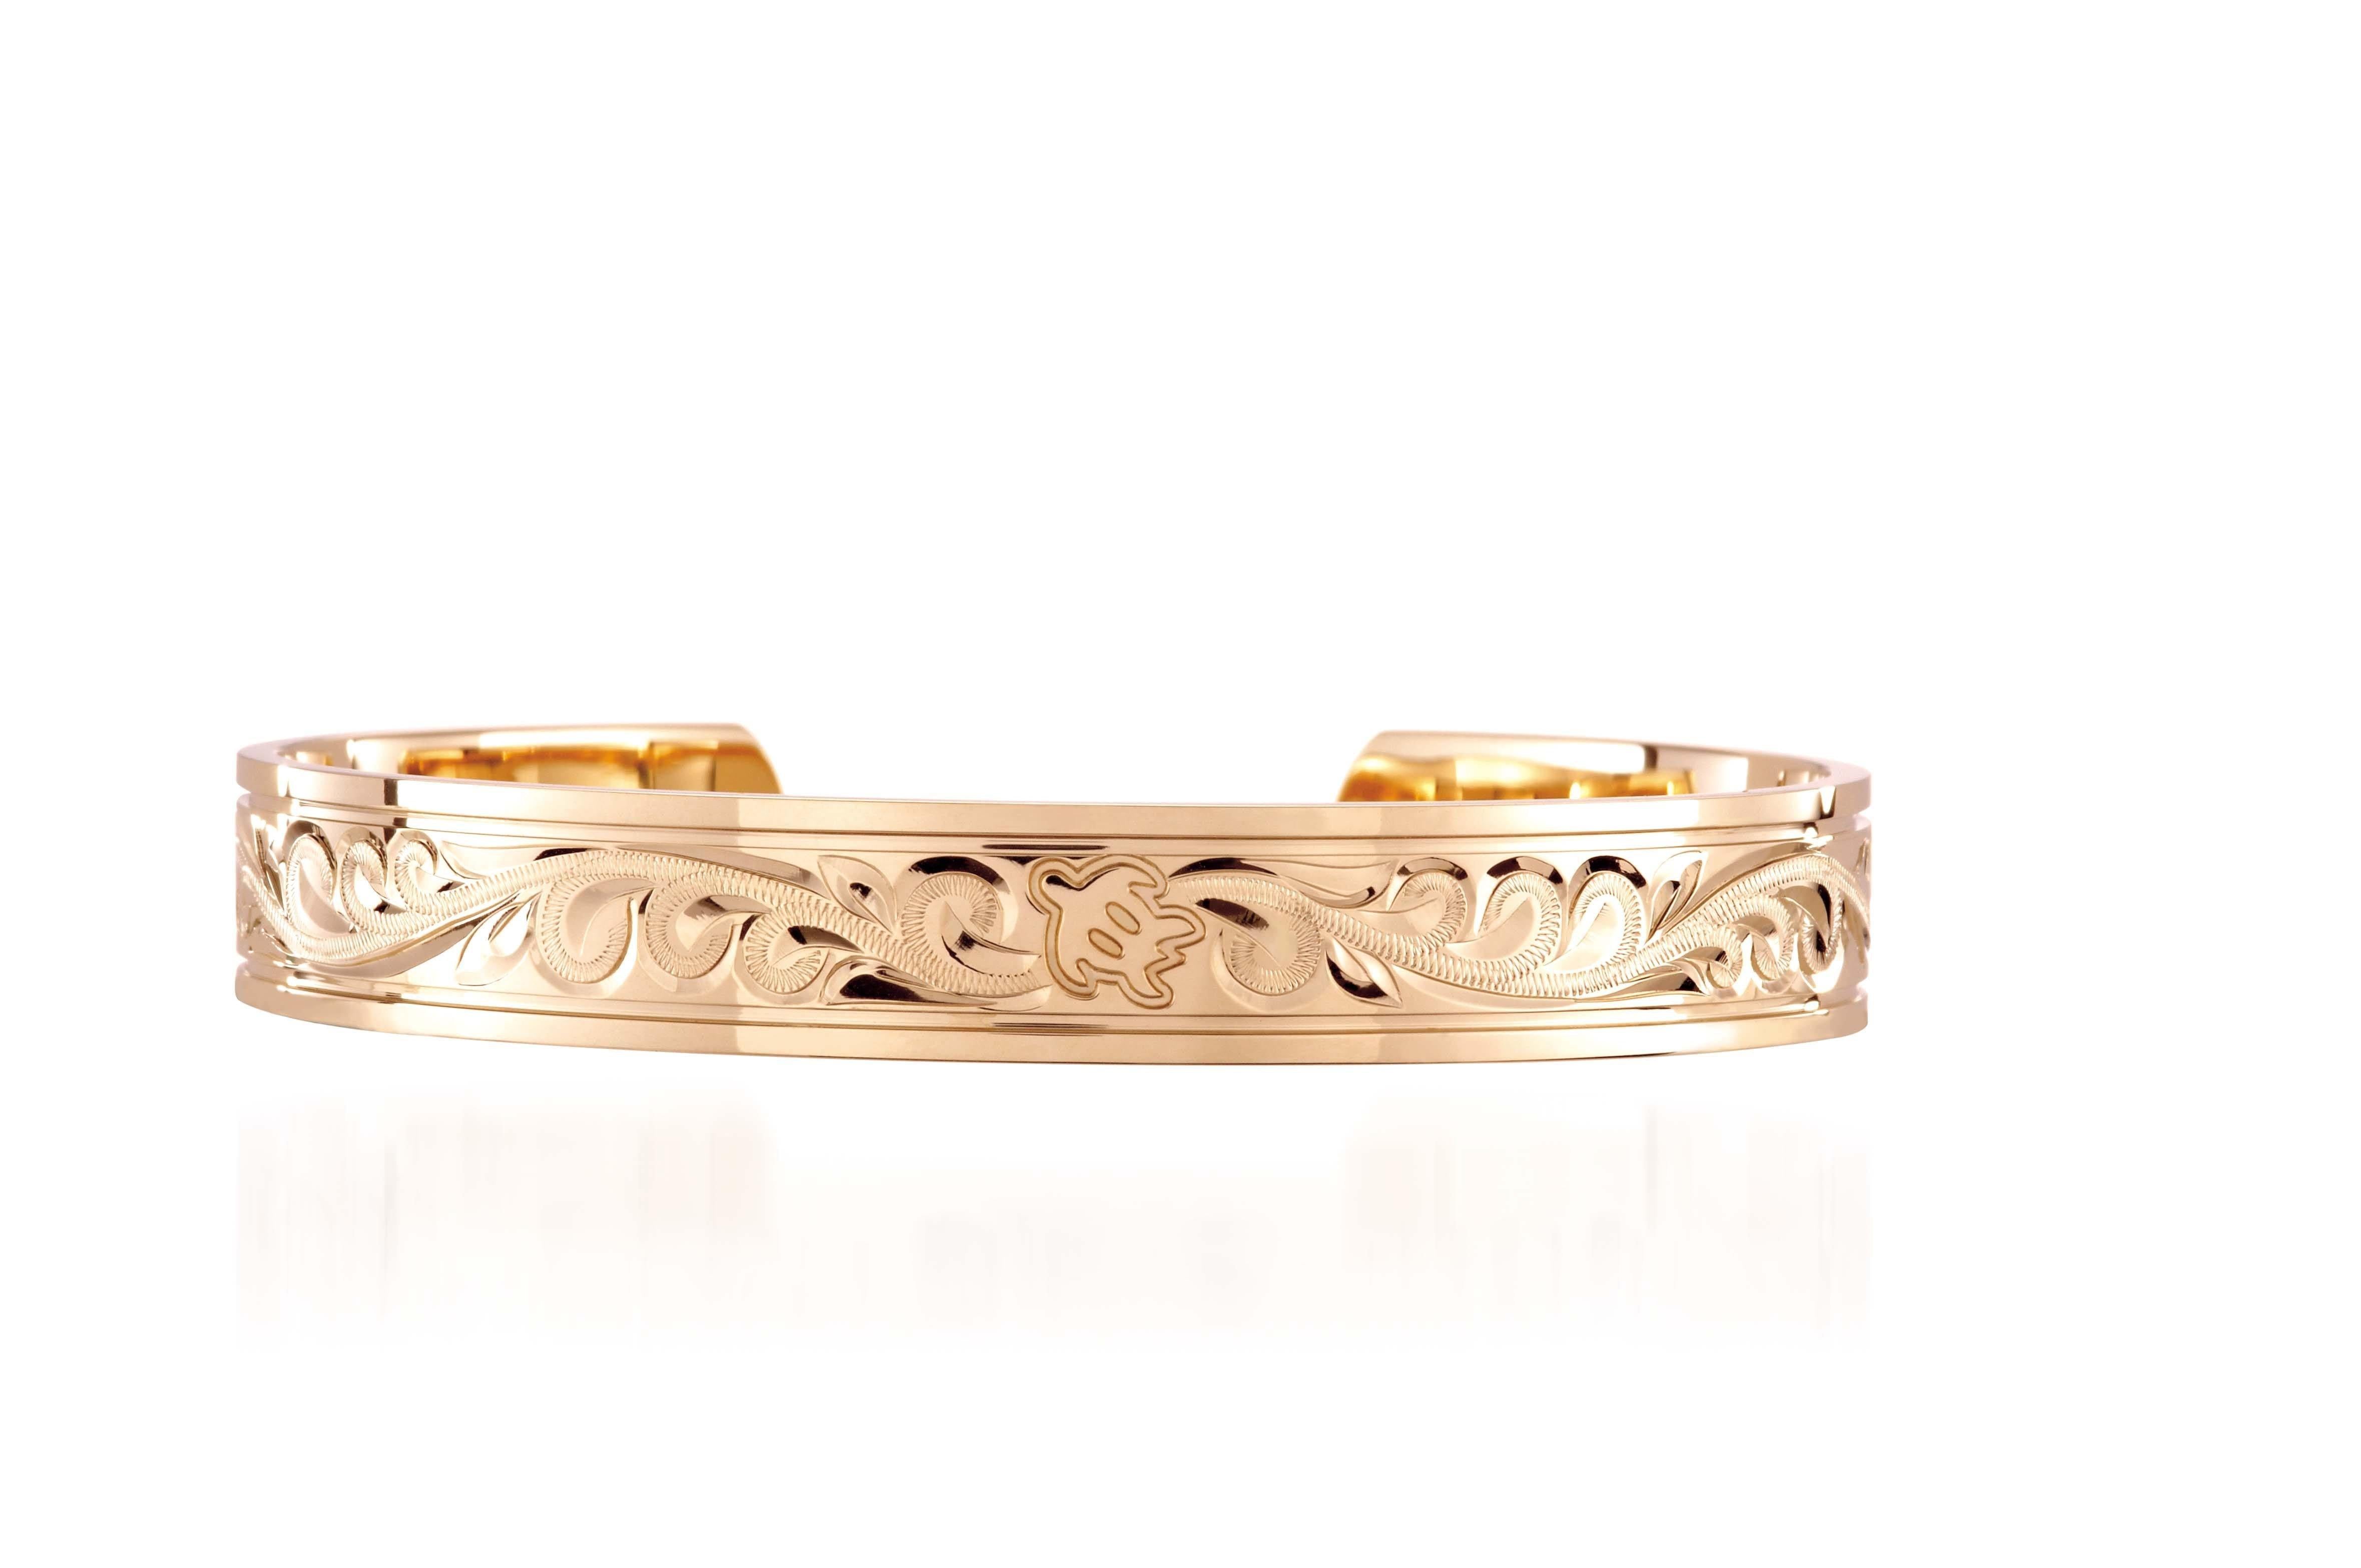 The picture shows a 14K yellow gold royal bangle with sea turtle engravings.